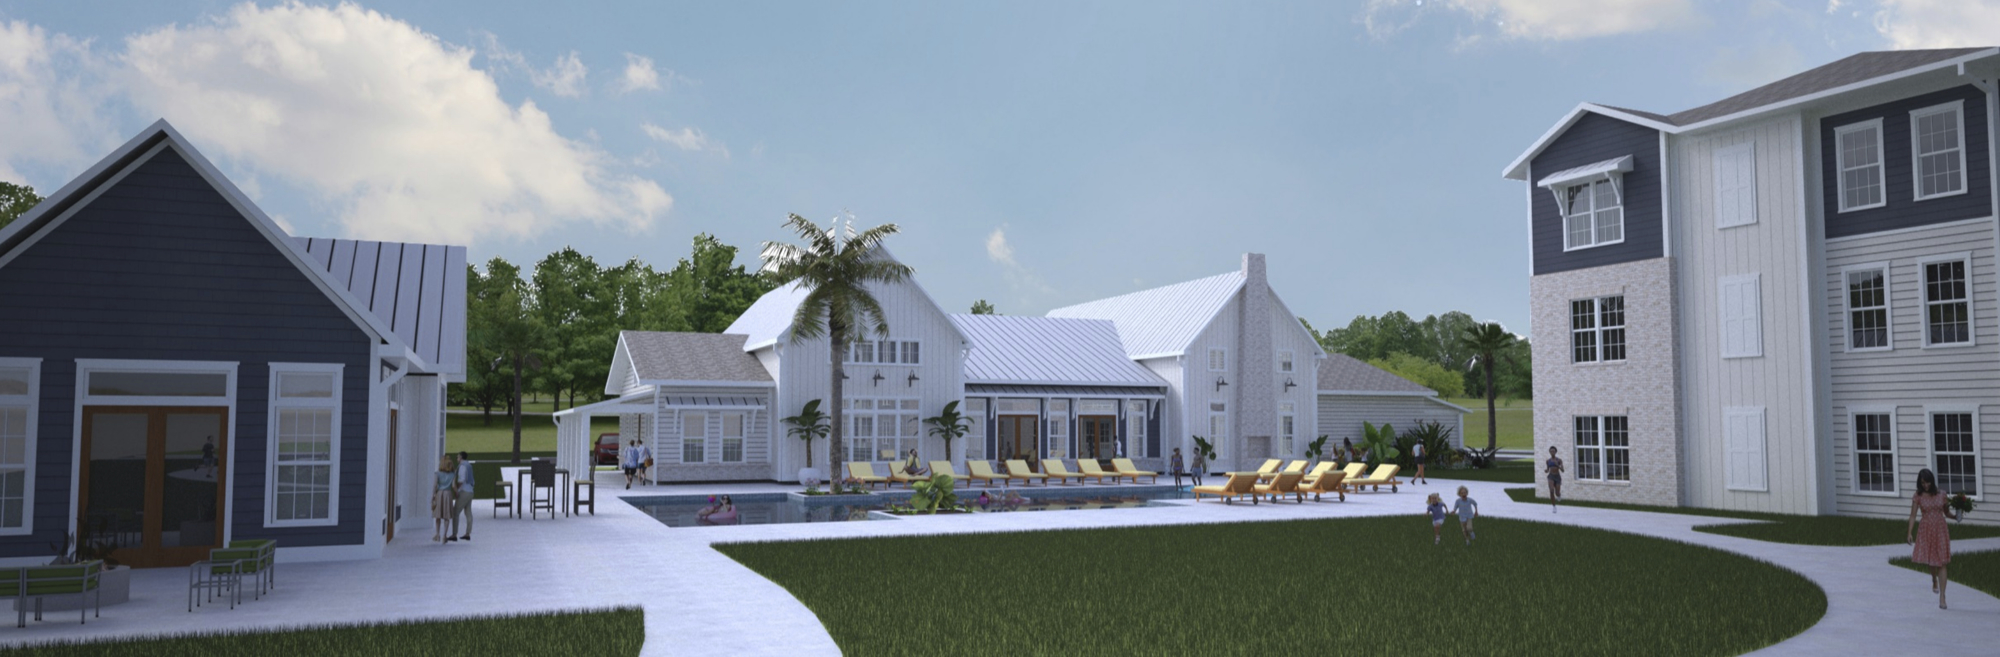 The Cadence by RangeWater is planned on 14 acres on the Duval County side of Nocatee. The master-planned community of Nocatee primarily is in northern St. Johns County.